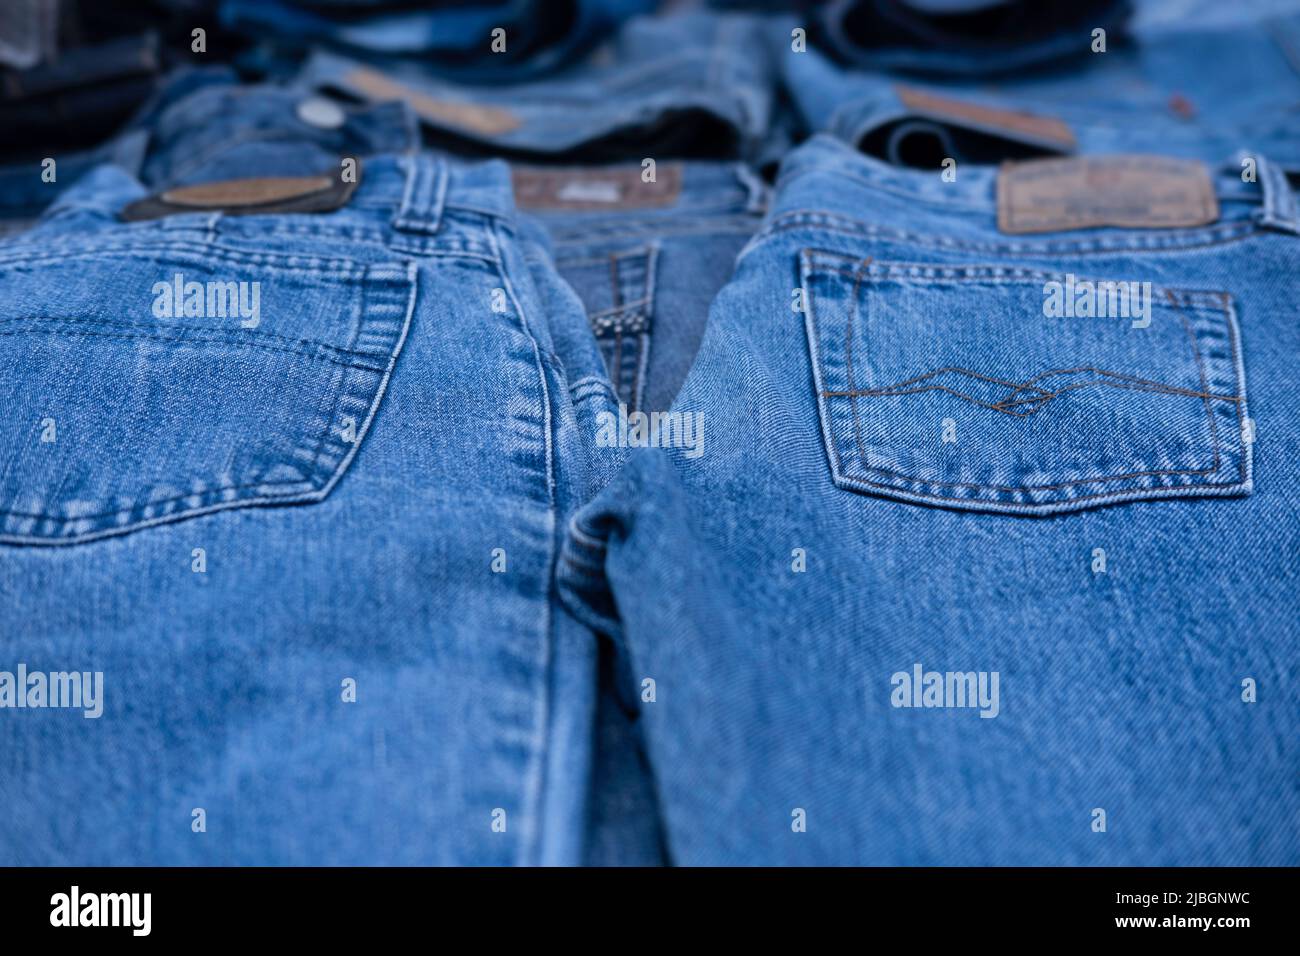 Jeans are displayed in a market stall. Focus on the pockets on the pants, the brands are blurred. Background image Stock Photo